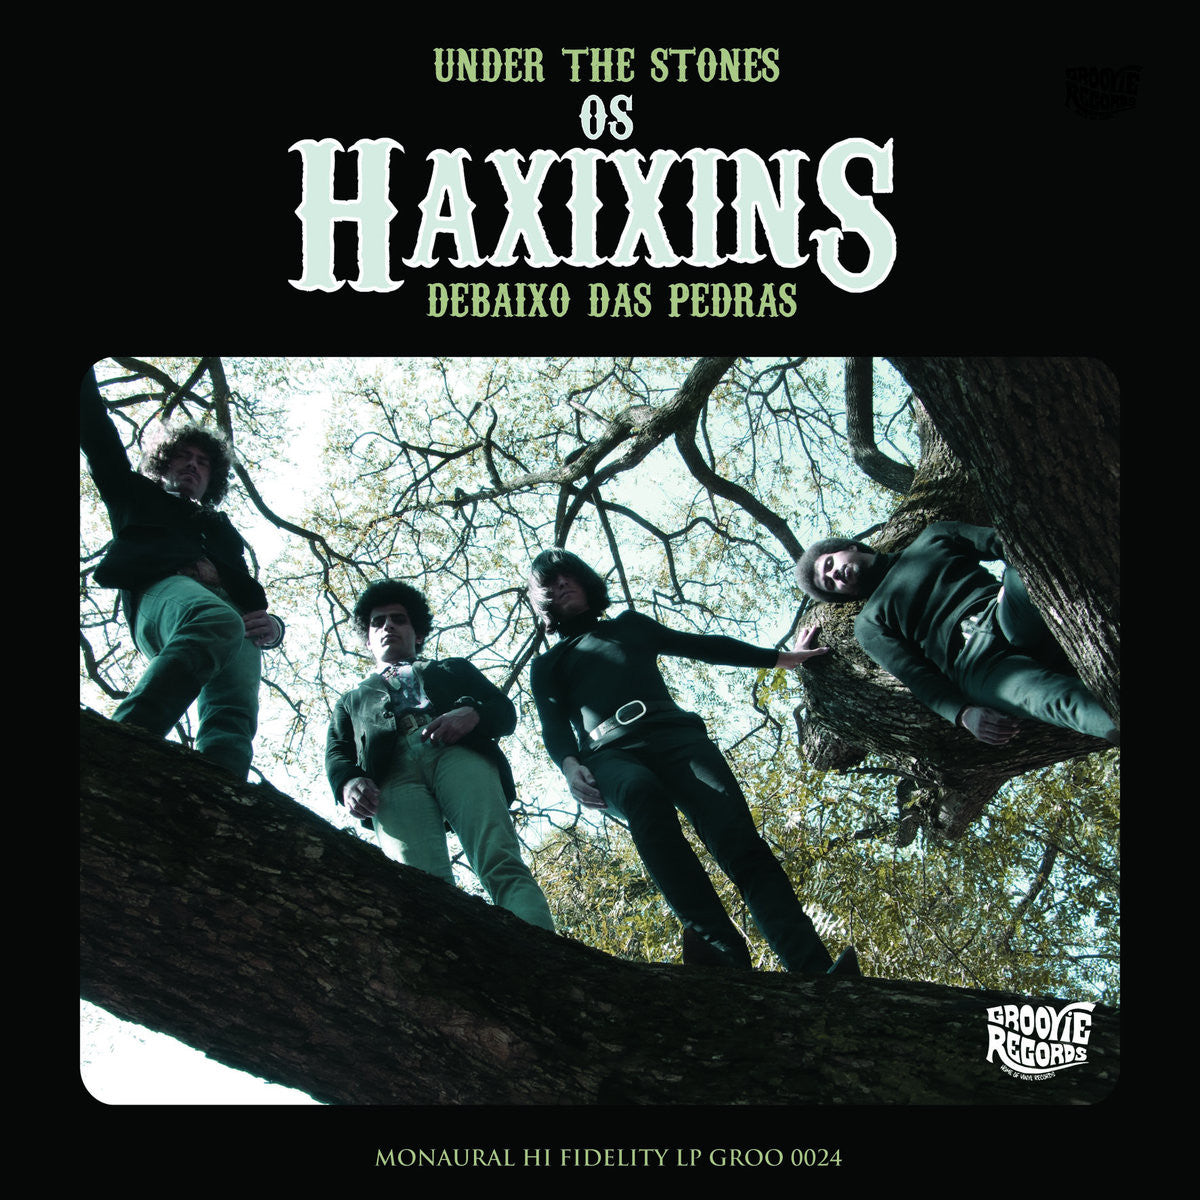 Os Haxixins- Under The Stones LP - Groovie - Dead Beat Records